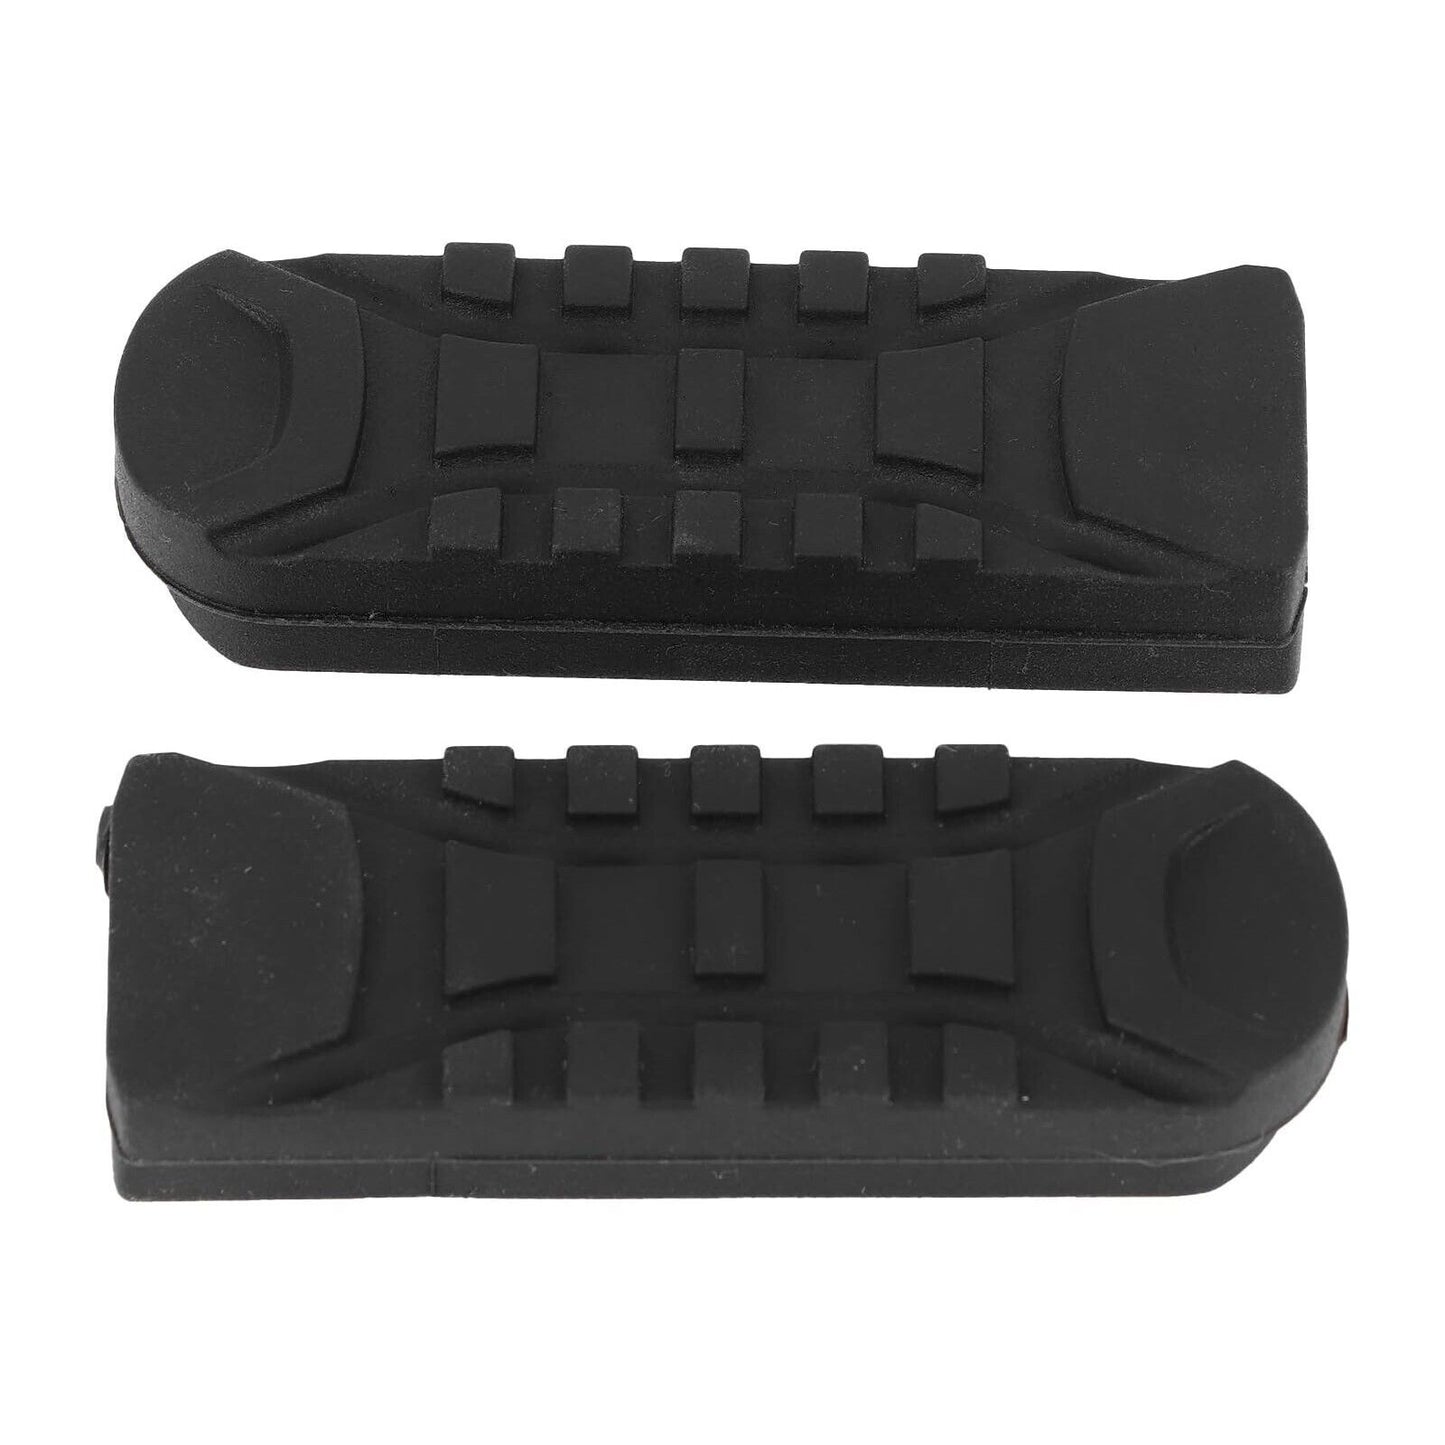 2pcs Motorcycle Front Rubber Foot Pegs Pedal Footrest for BMW S1000XR R1250GS R nine T F850GS F750GS